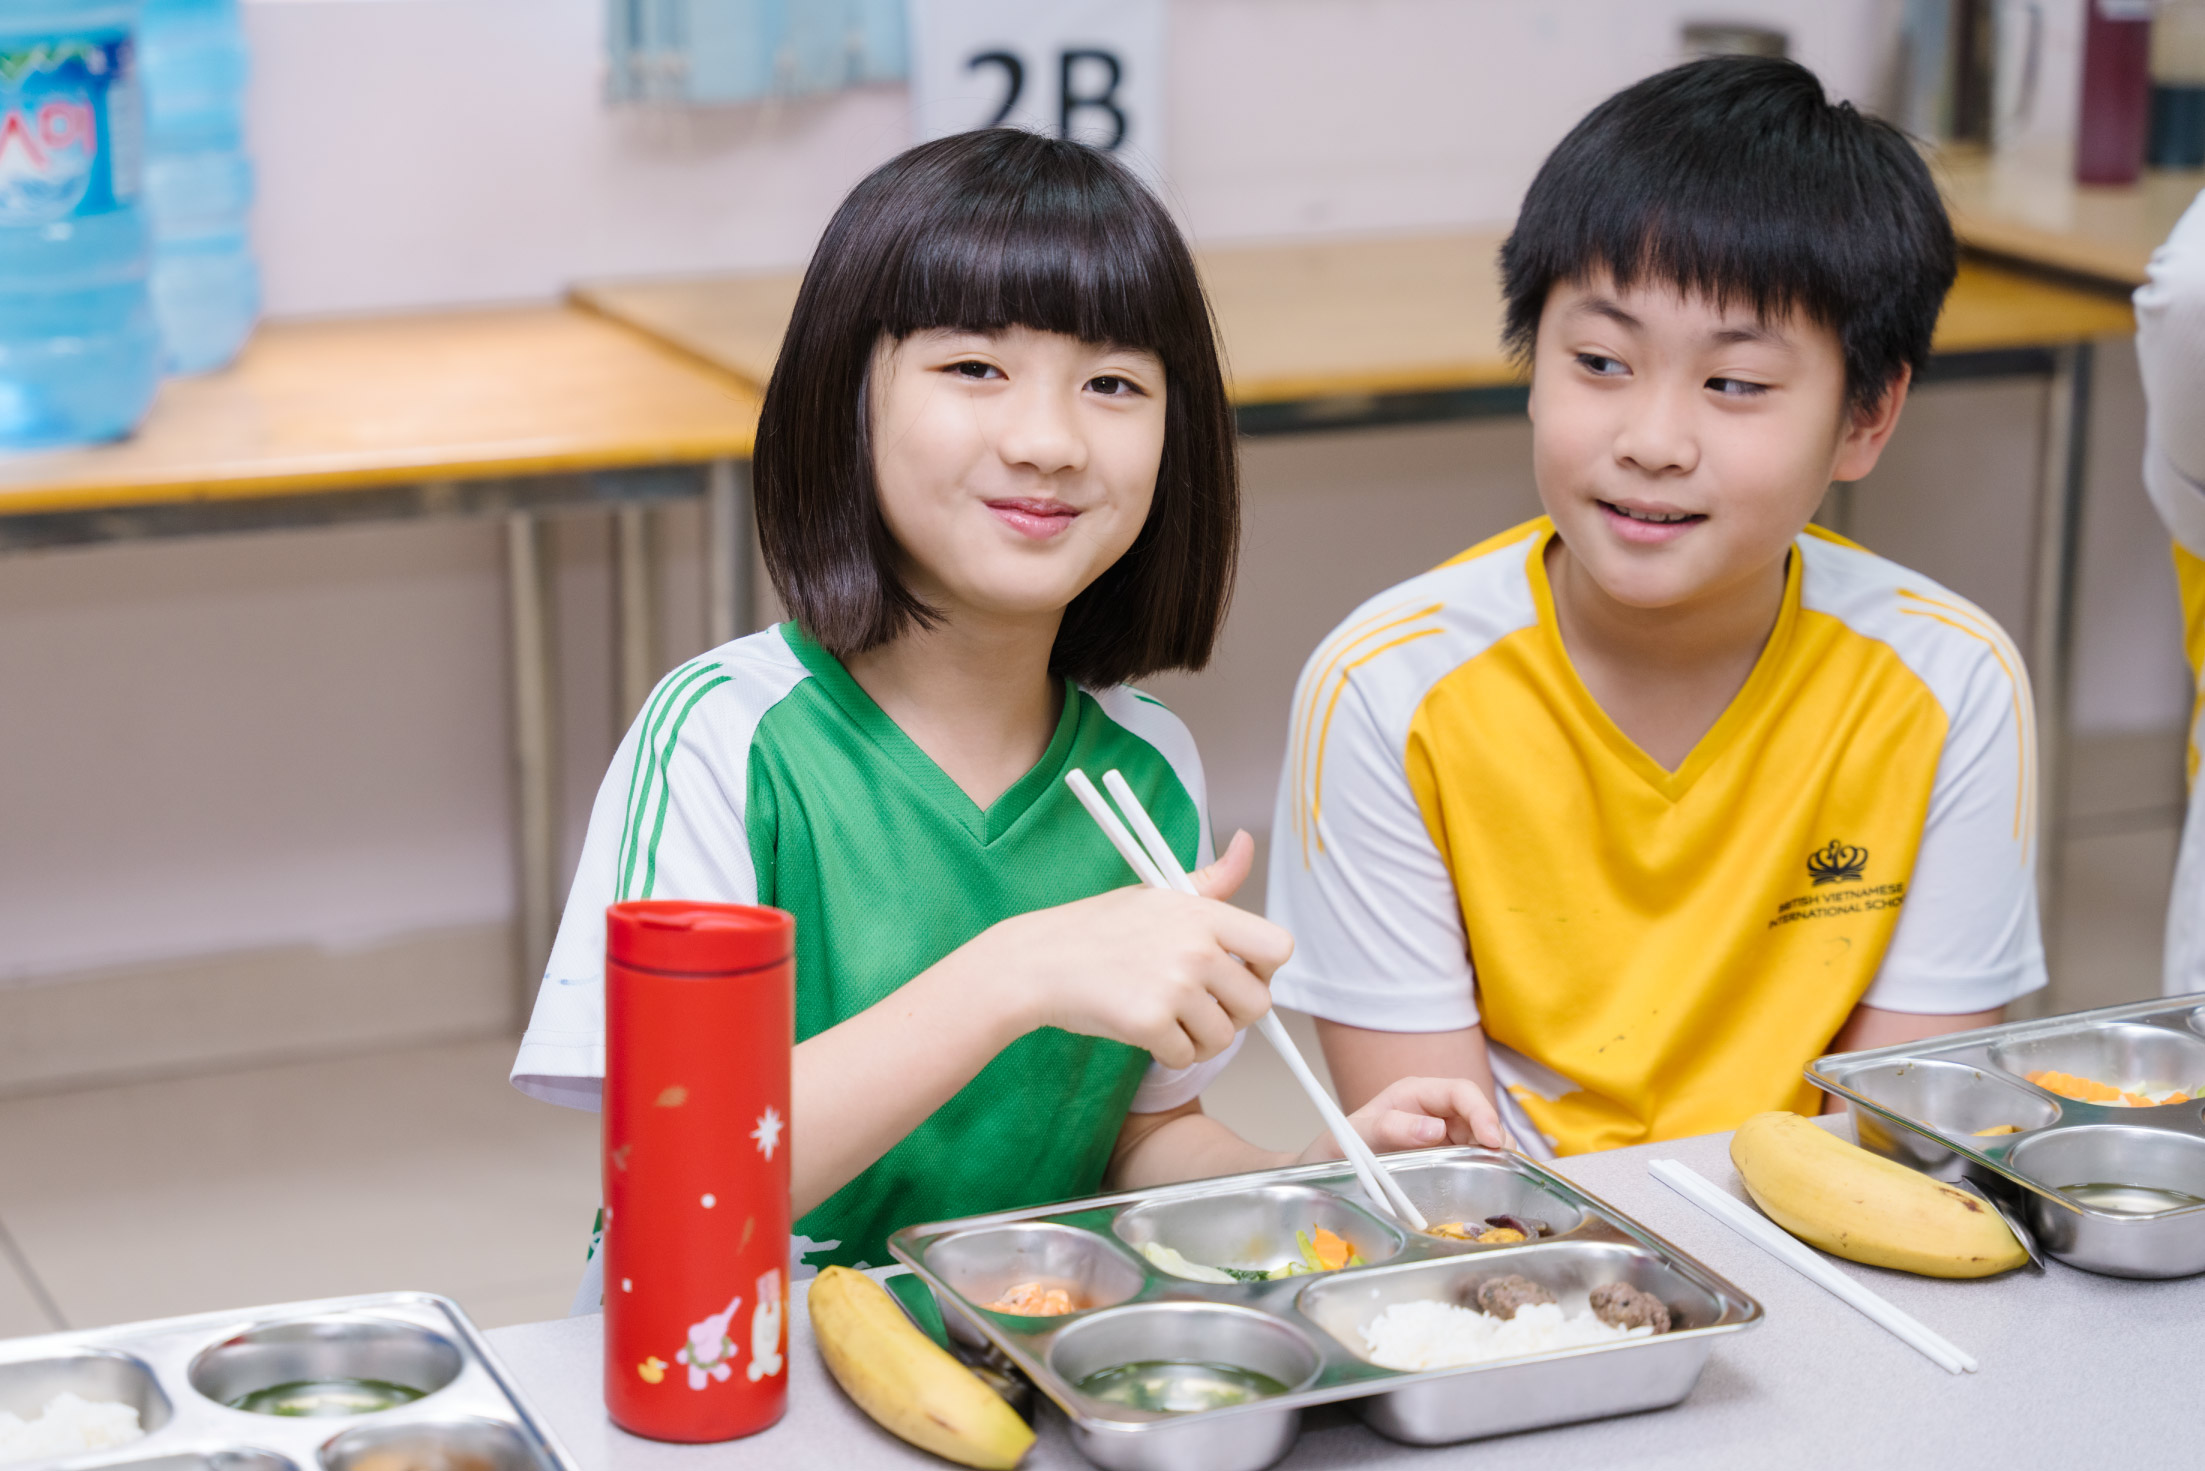 The power of wellbeing in education strengthens in Vietnam through Nord Anglia Education - The power of wellbeing in education strengthens in Vietnam through Nord Anglia Education